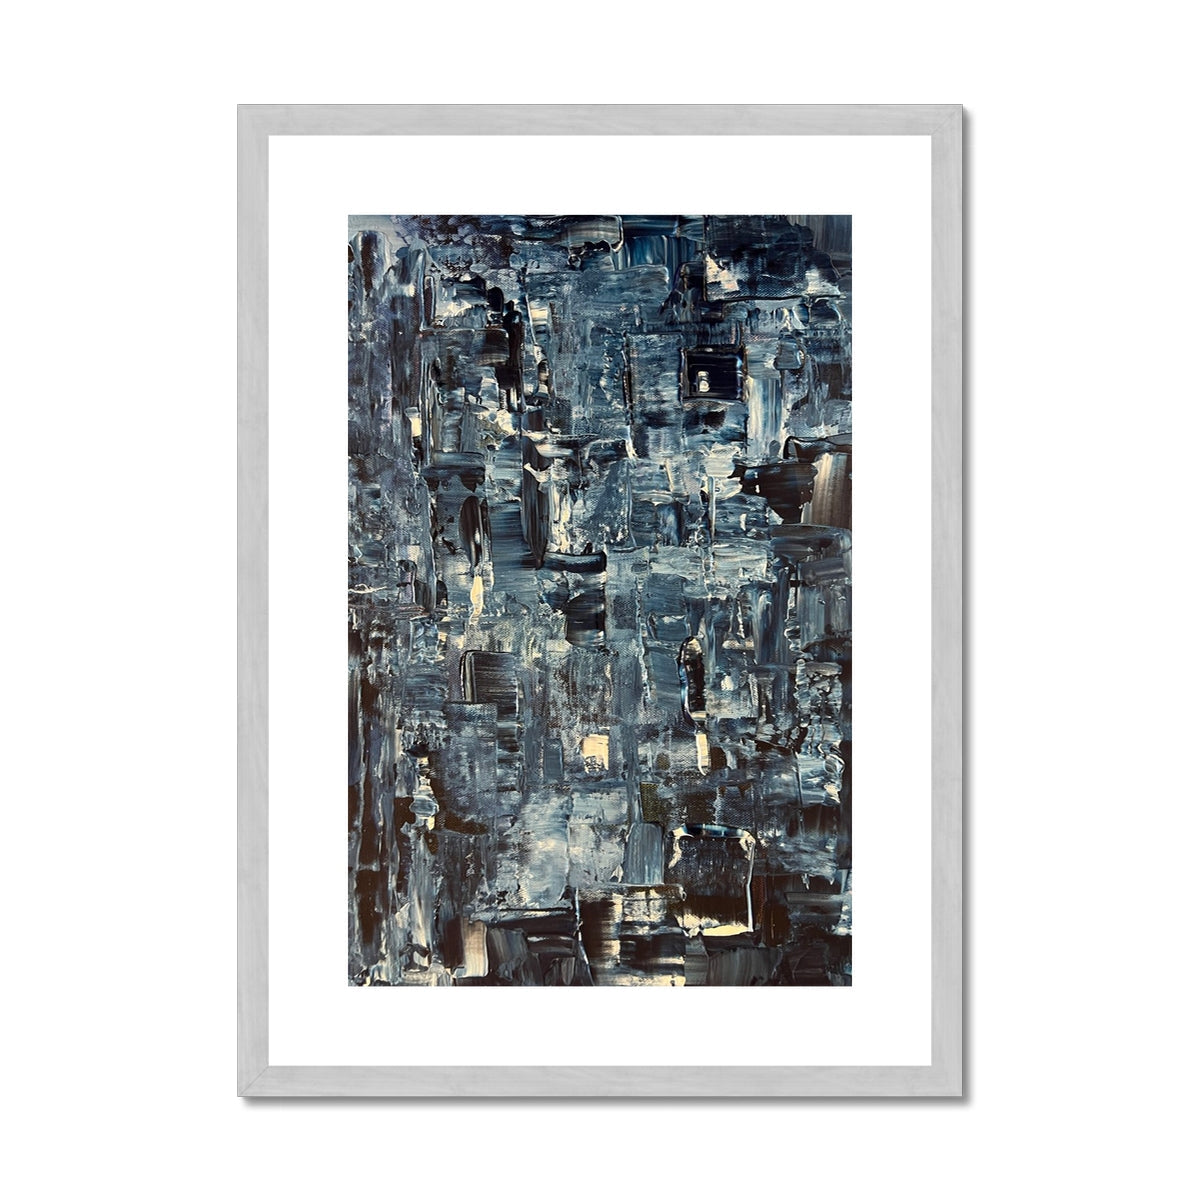 Inception Abstract Painting | Antique Framed & Mounted Prints From Scotland-Antique Framed & Mounted Prints-Abstract & Impressionistic Art Gallery-A2 Portrait-Silver Frame-Paintings, Prints, Homeware, Art Gifts From Scotland By Scottish Artist Kevin Hunter